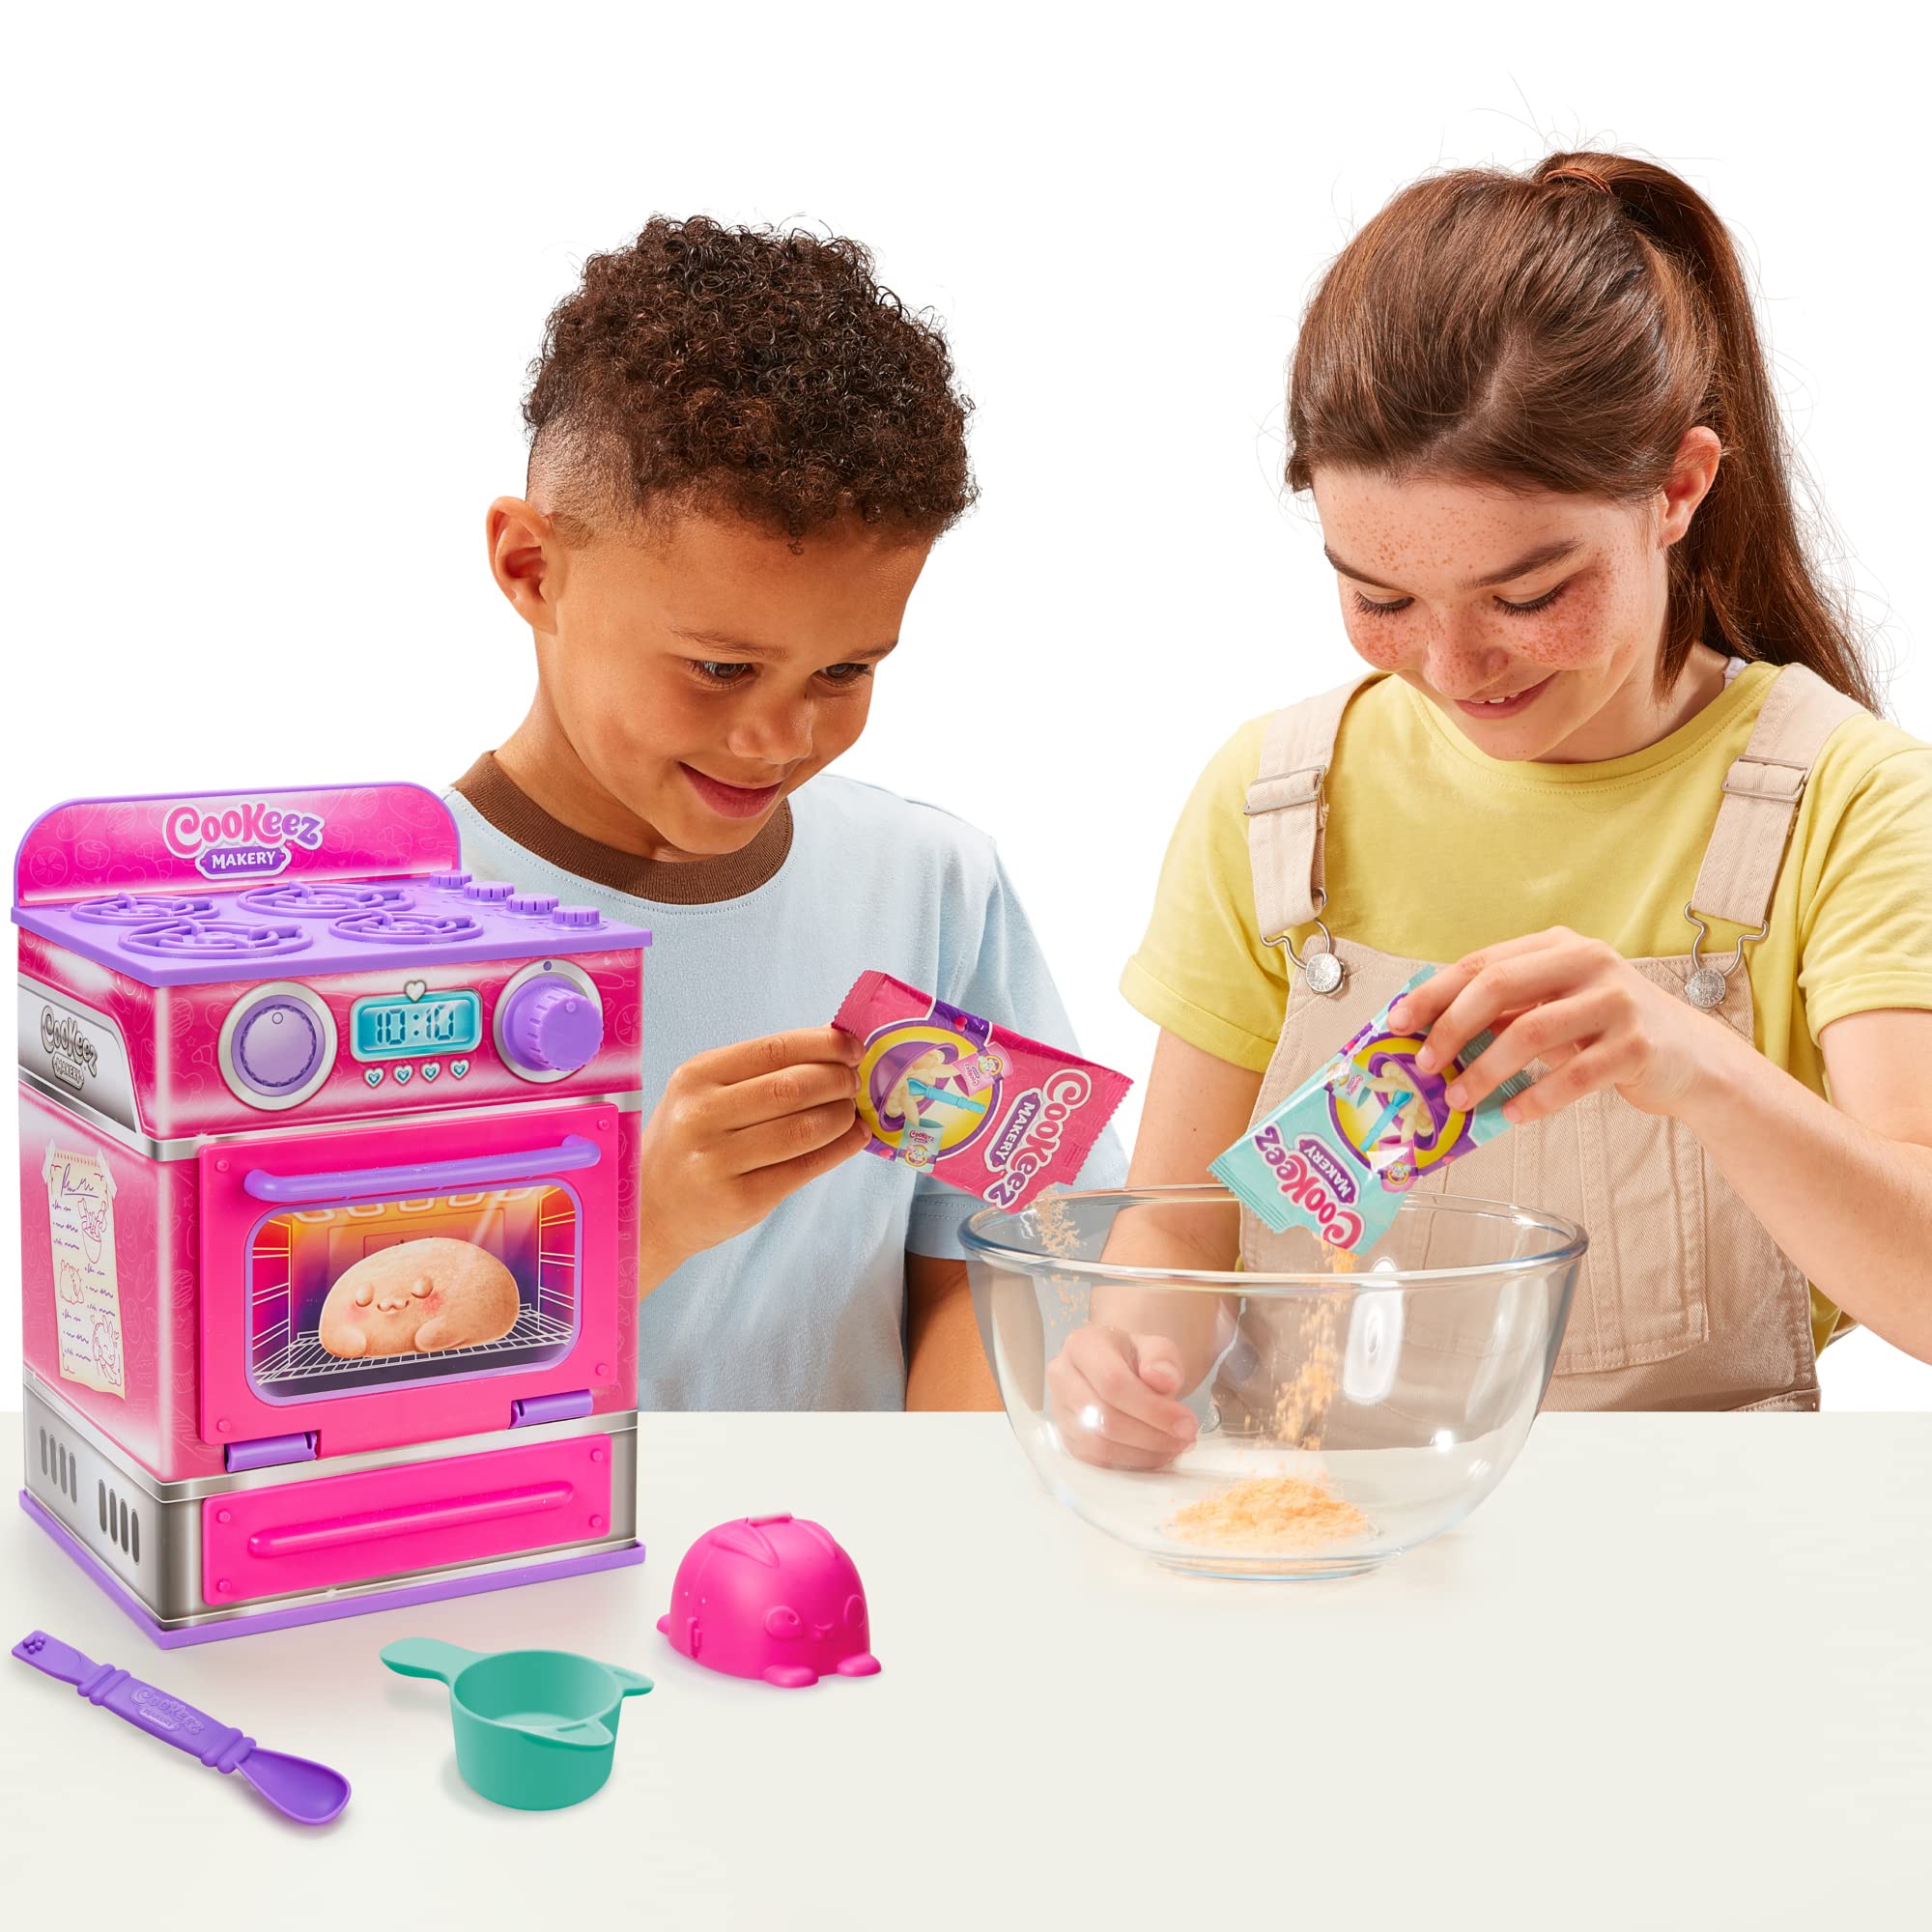 COOKEEZ MAKERY Cinnamon Treatz Oven. Mix & Make a Plush Best Friend! Place Your Dough in The Oven and Be Amazed When A Warm, Scented, Interactive, Plush Friend Comes Out! Which Will You Make?